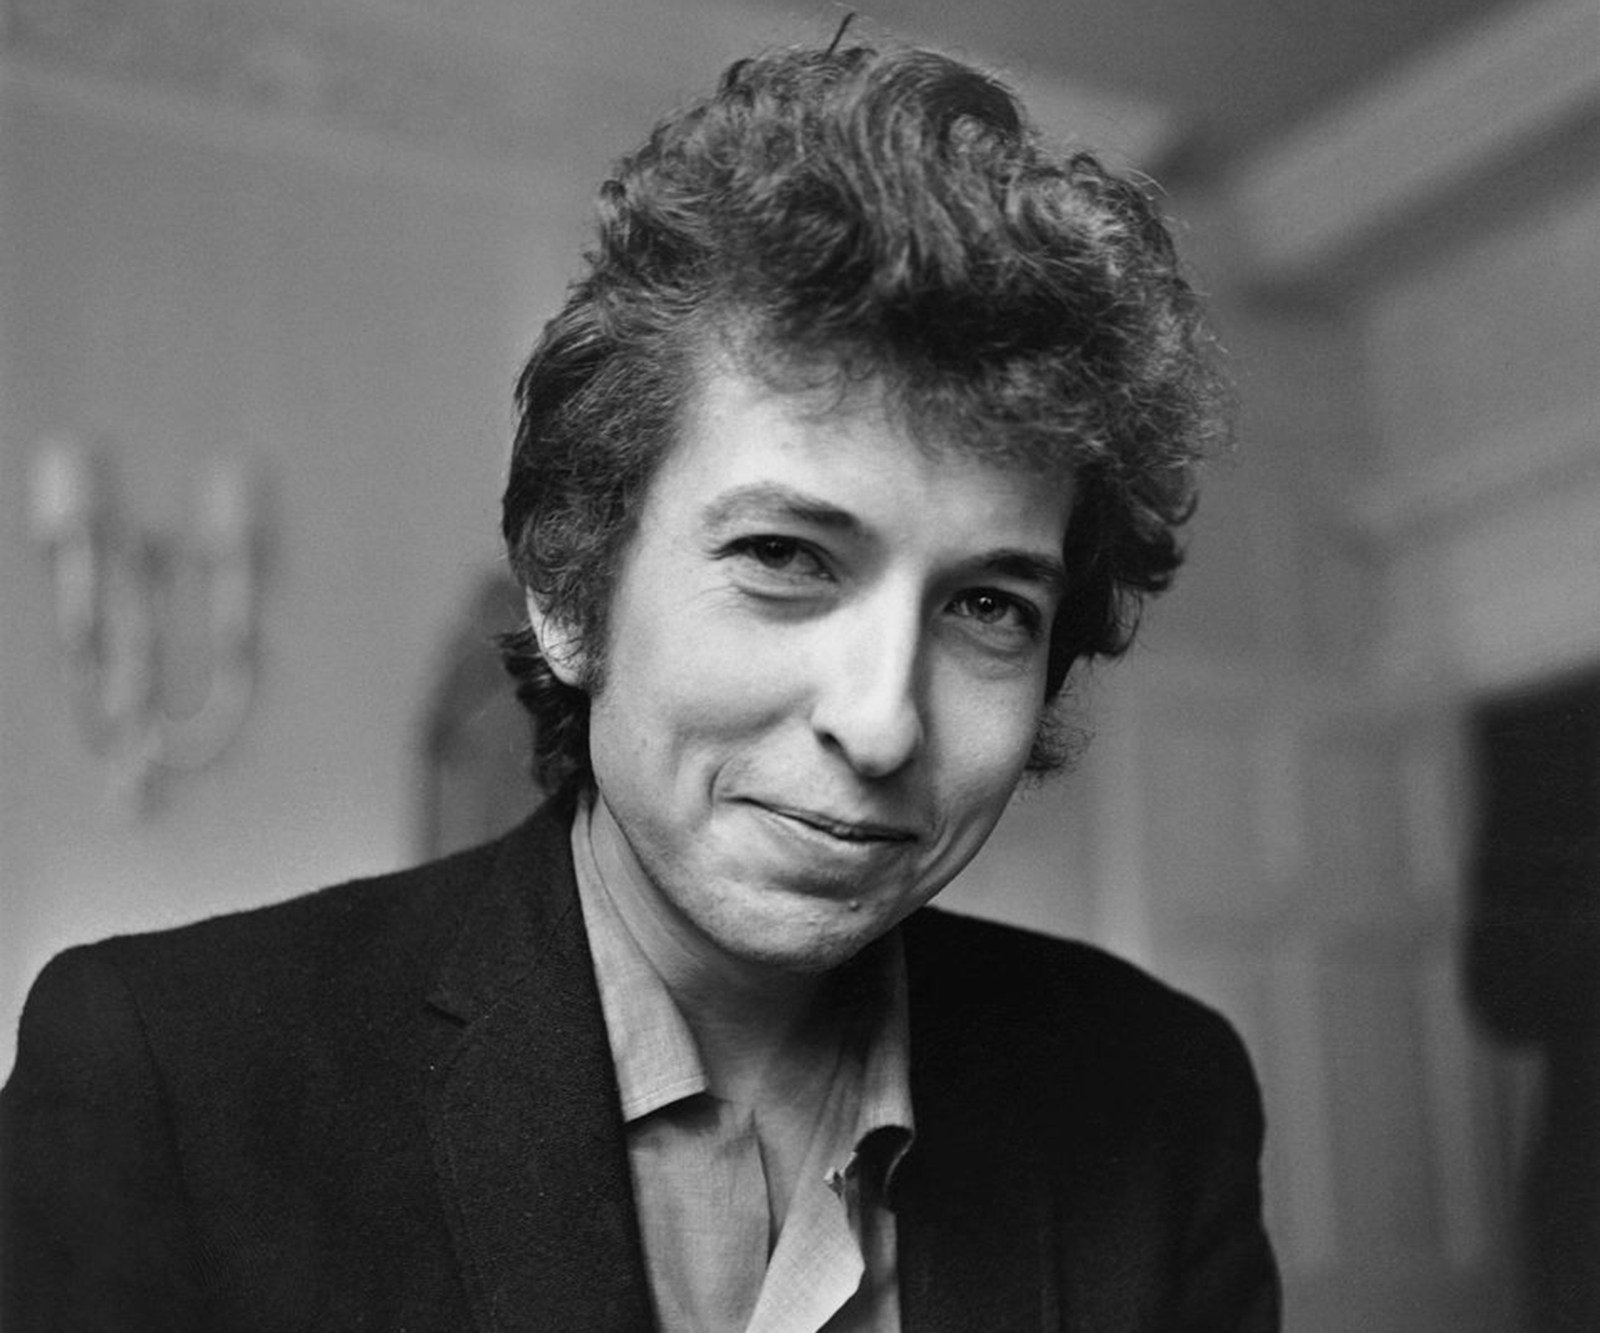 US singer-songwriting legend Bob Dylan – who rose to fame in the 1960s – has won a Nobel Prize in literature. Photo: Getty Images/TNS